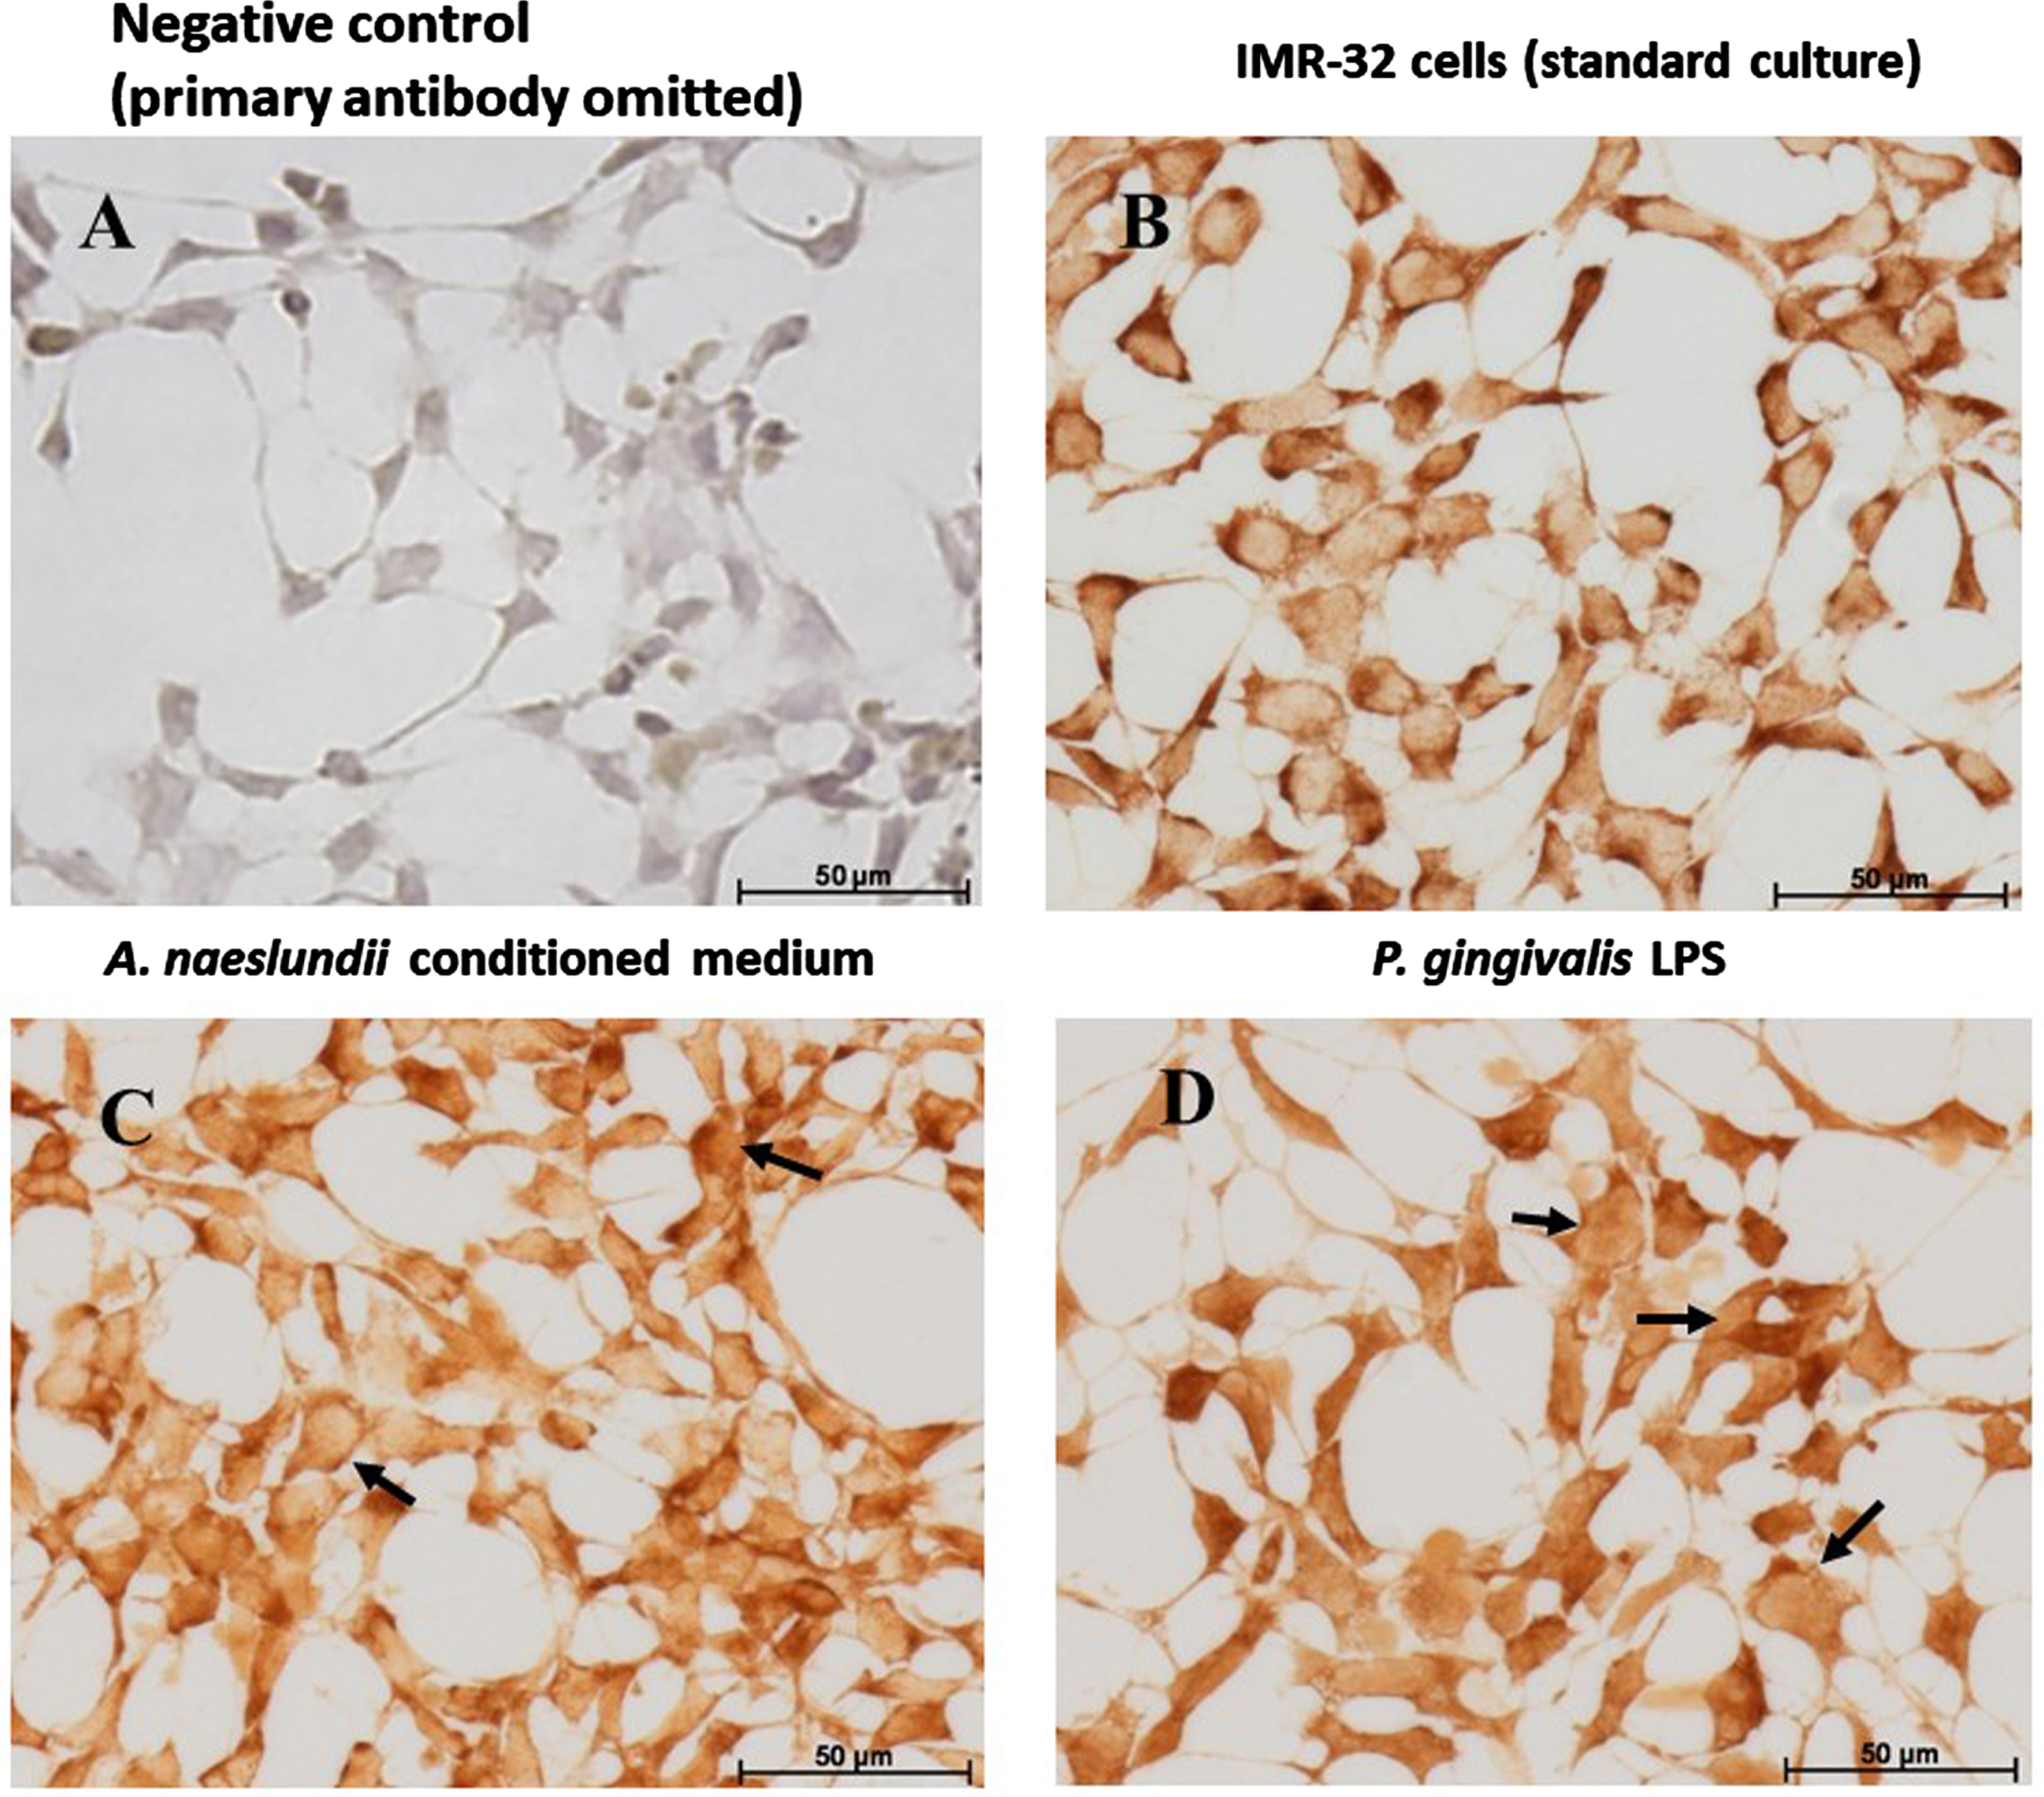 IMR 32 cells: GSK-3β Immunohistochemistry. GSK-3β immunostaining of IMR-32 cells: Comparing with the negative control (A), GSK-3β is expressed by IMR-32 cells under control and all treatment conditions. Under standard culture conditions (B), IMR-32 showed strong cytoplasmic localization of GSK-3β. A. naeslundii virulence factors demonstrated strong GSK-3β immunostaining in the cytoplasm (C) with a hint of nuclear staining in some cells (C arrows). Cells treated with Pg.LPS (D) predominantly demonstrated nuclear staining (D, arrows) and weaker cytoplasmic staining.